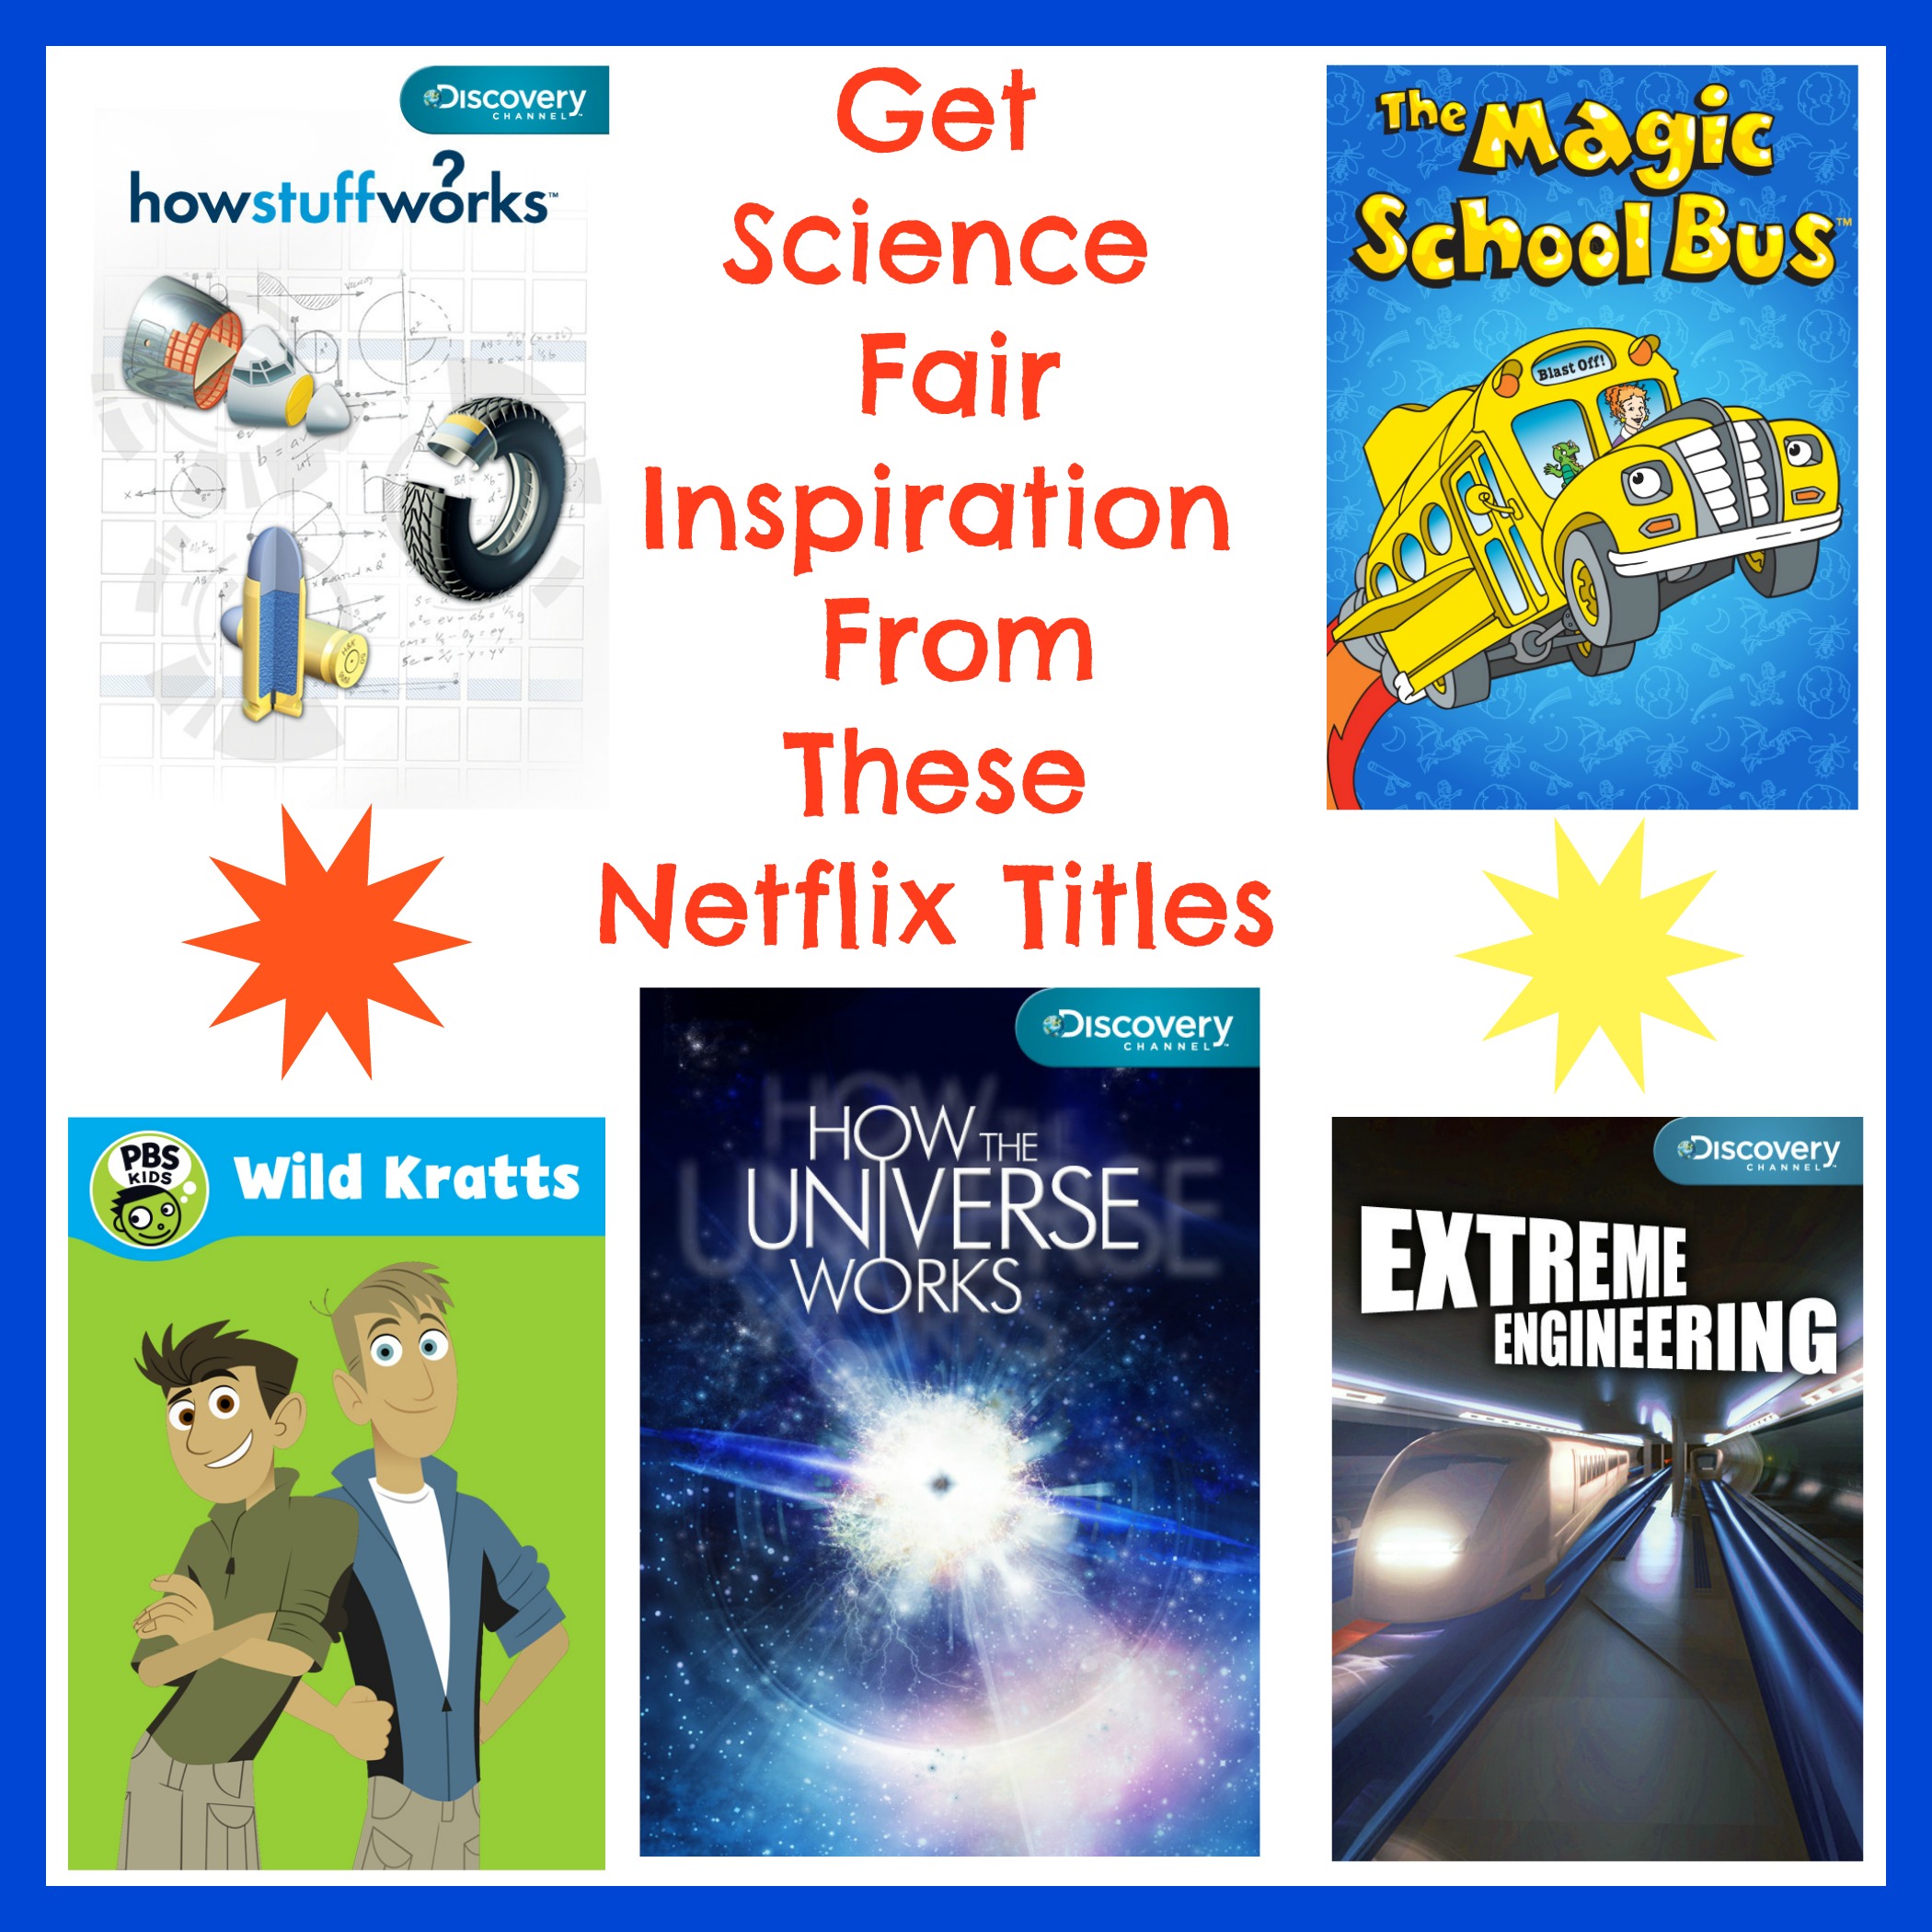 Get Science Fair Inspiration from These 12 Titles on Netflix